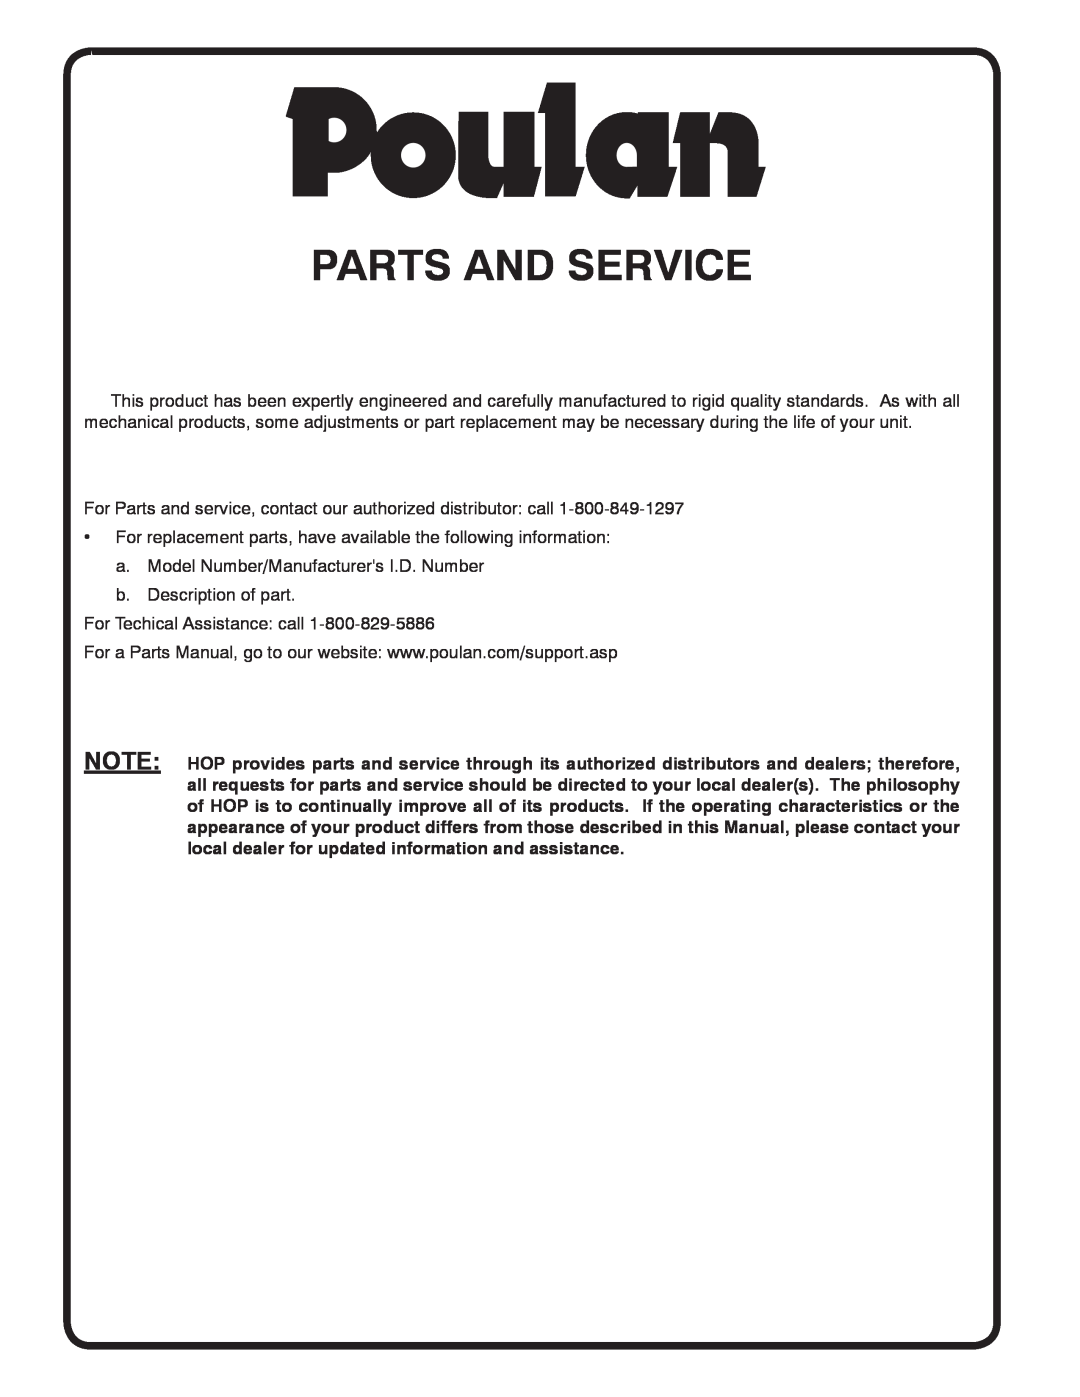 Poulan 96012006802, 414754 manual Parts And Service 